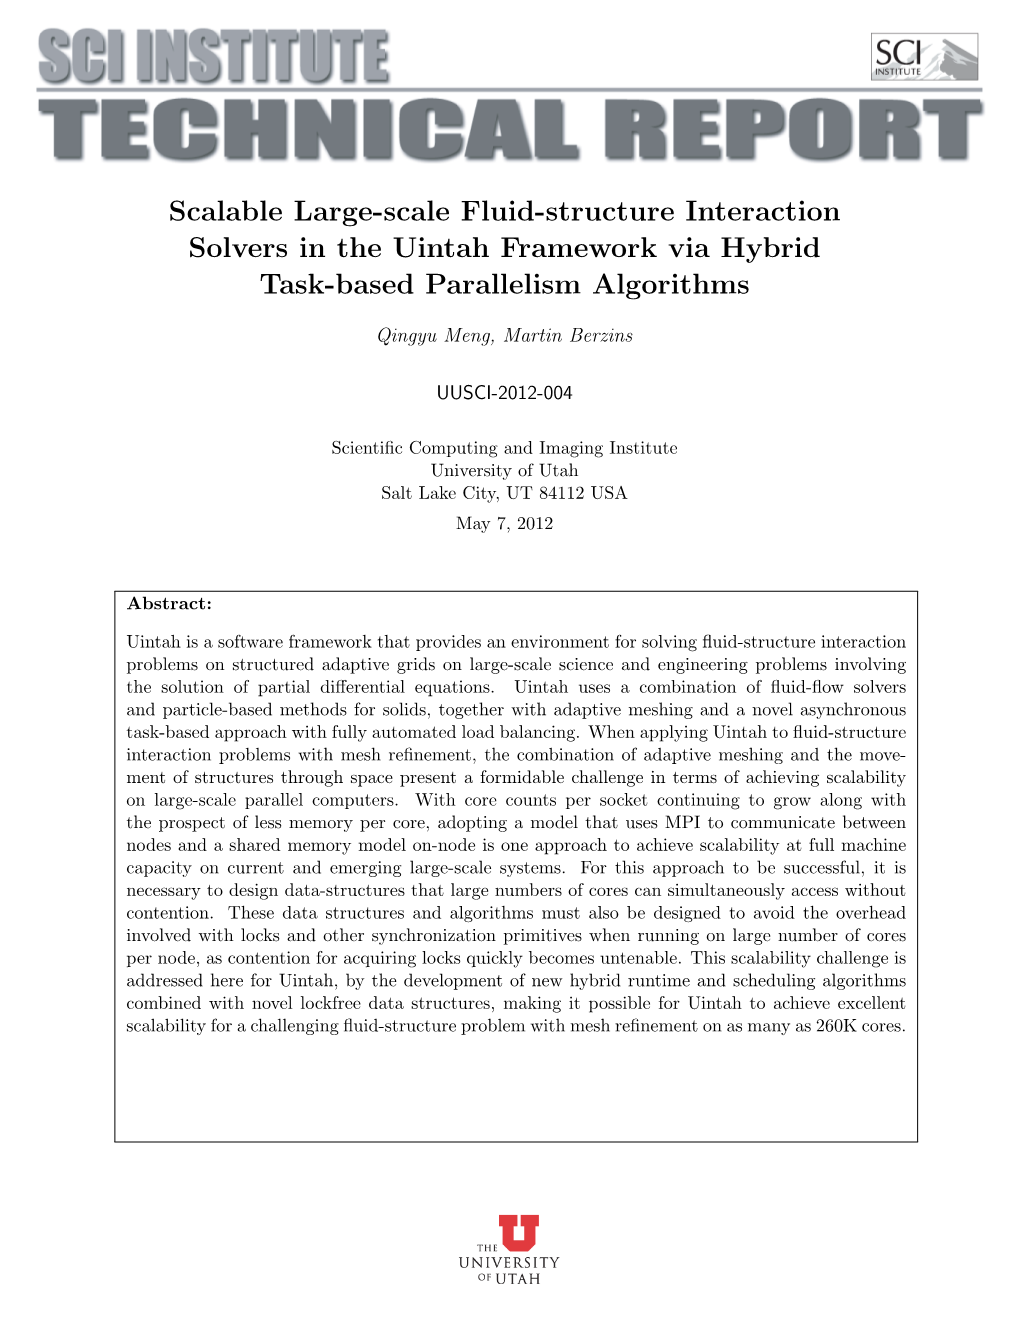 Scalable Large-Scale Fluid-Structure Interaction Solvers in the Uintah Framework Via Hybrid Task-Based Parallelism Algorithms